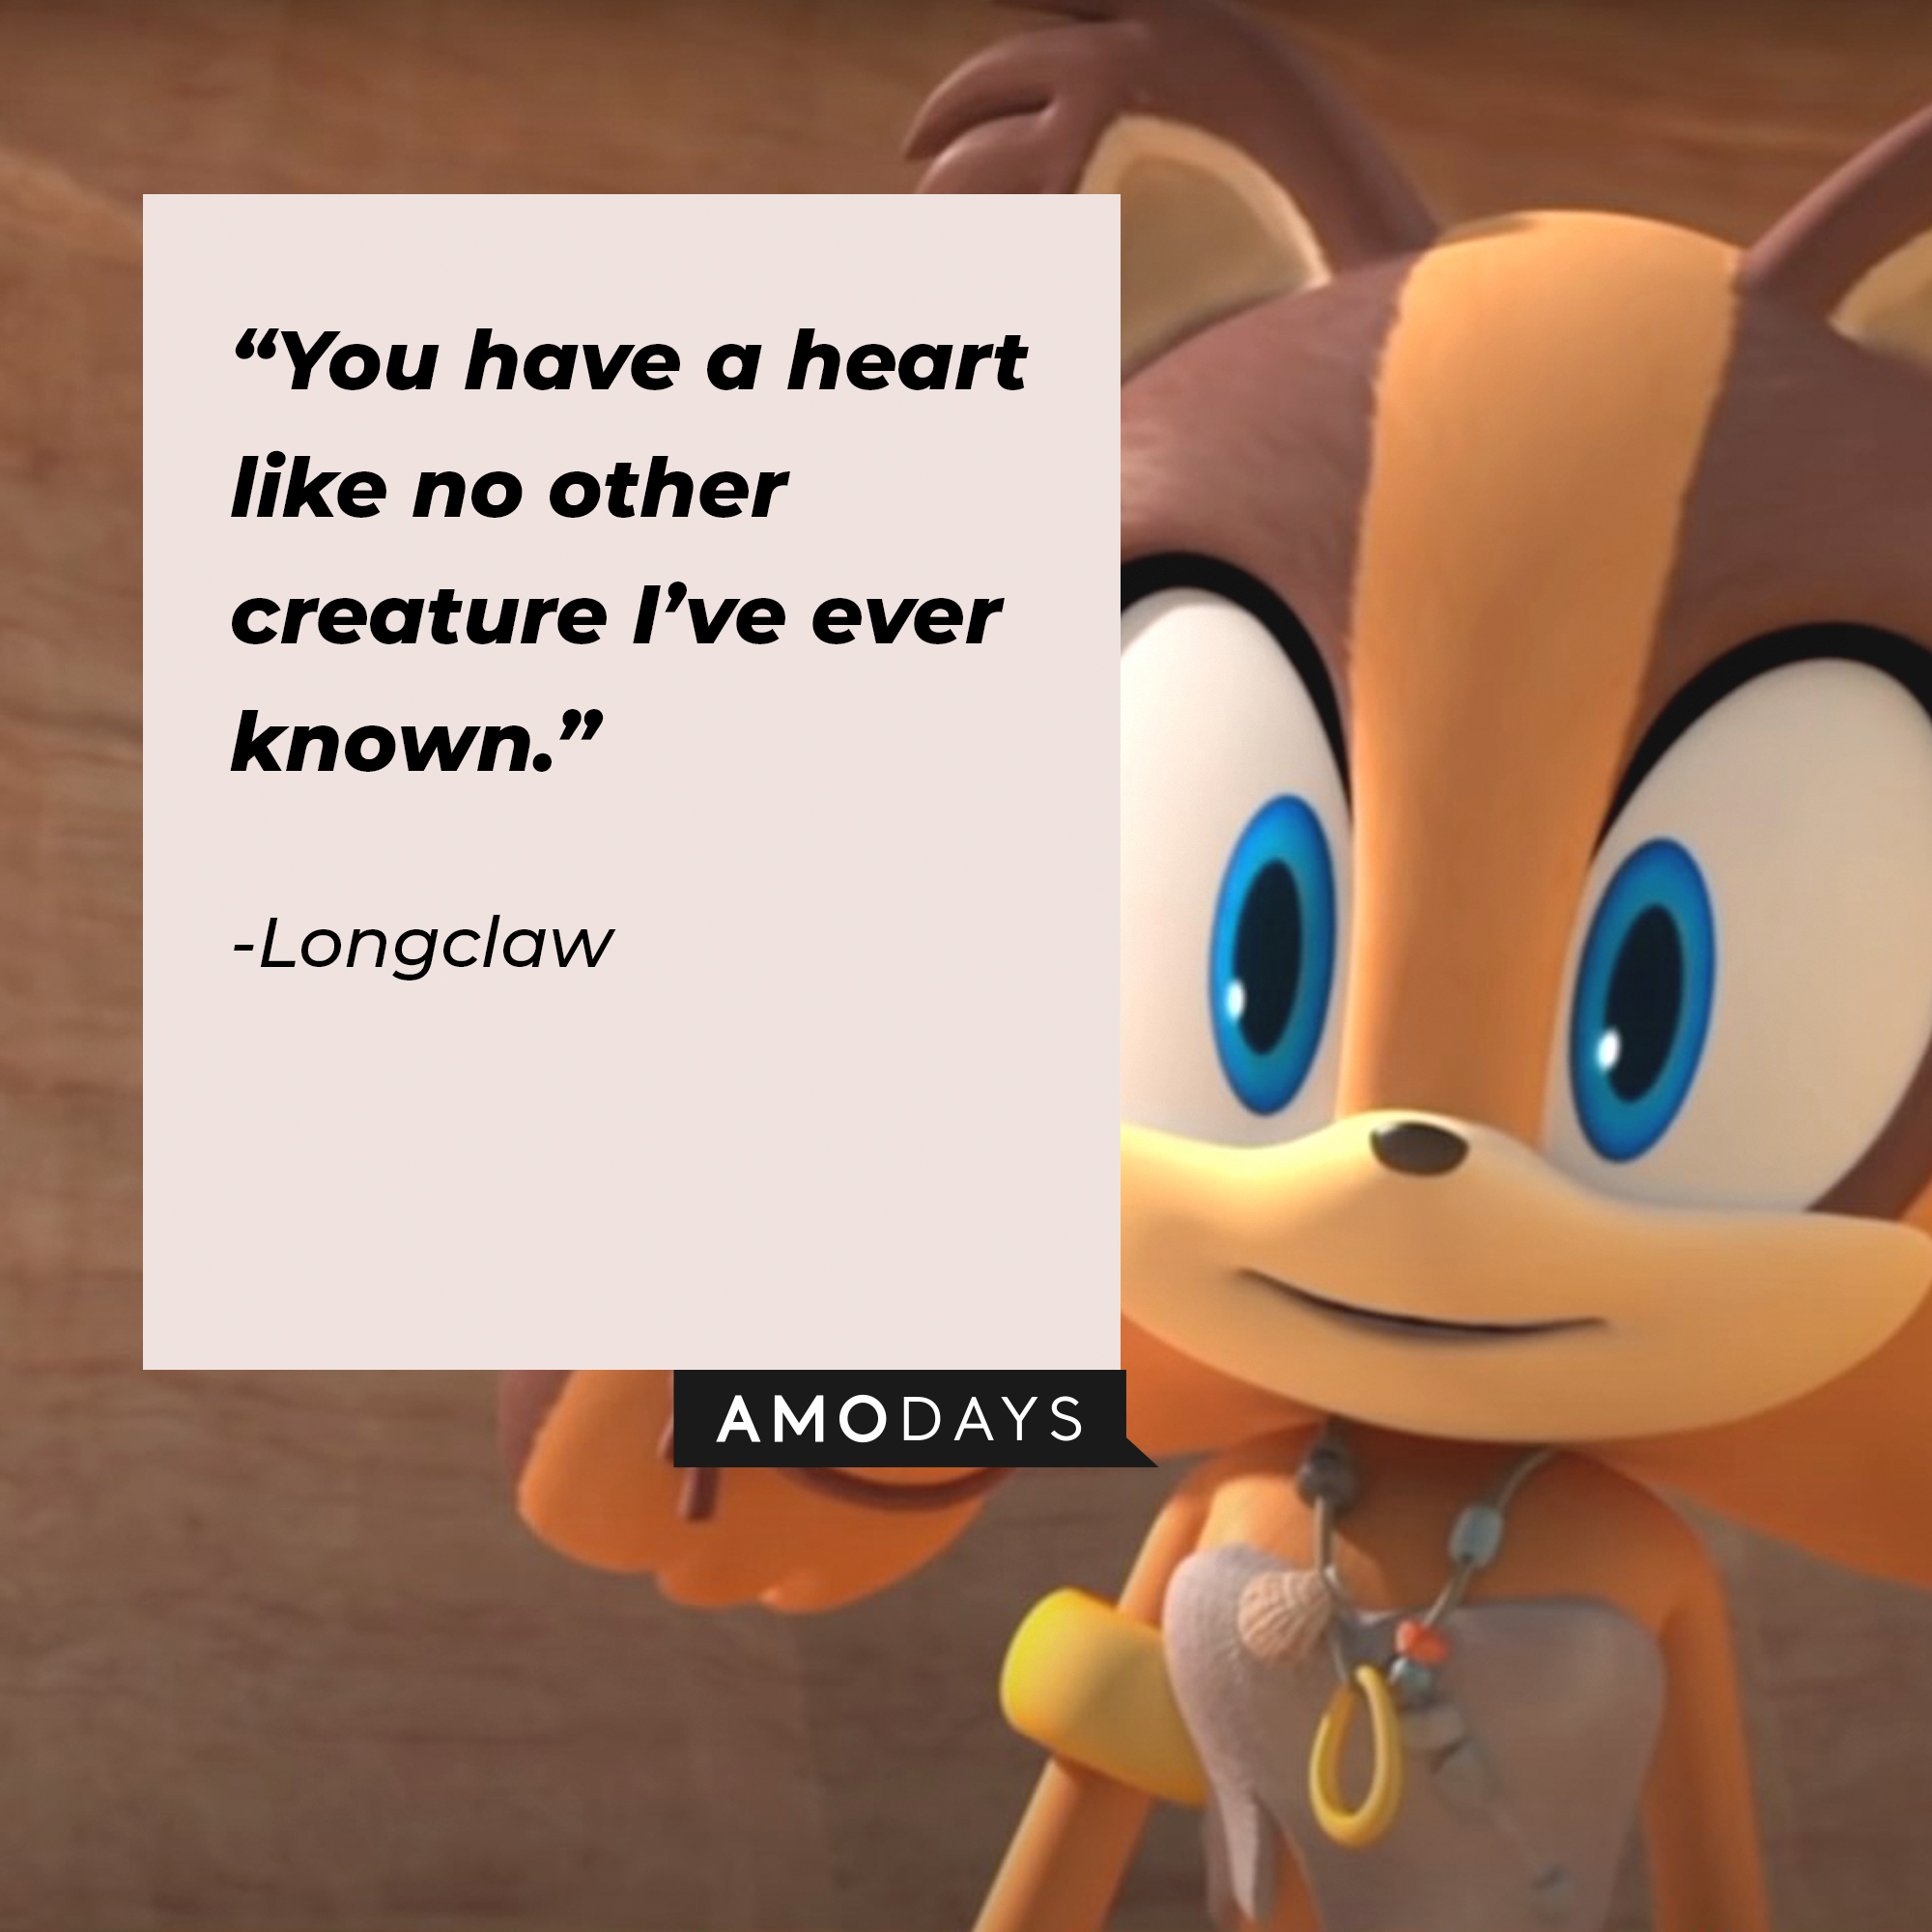 An image of a character from “Sonic the Hedgehog 2” with Longclaw’s quote: "You have a big heart, like no other creature I've ever known." | Source: youtube.com/Sonic.Boom_Official